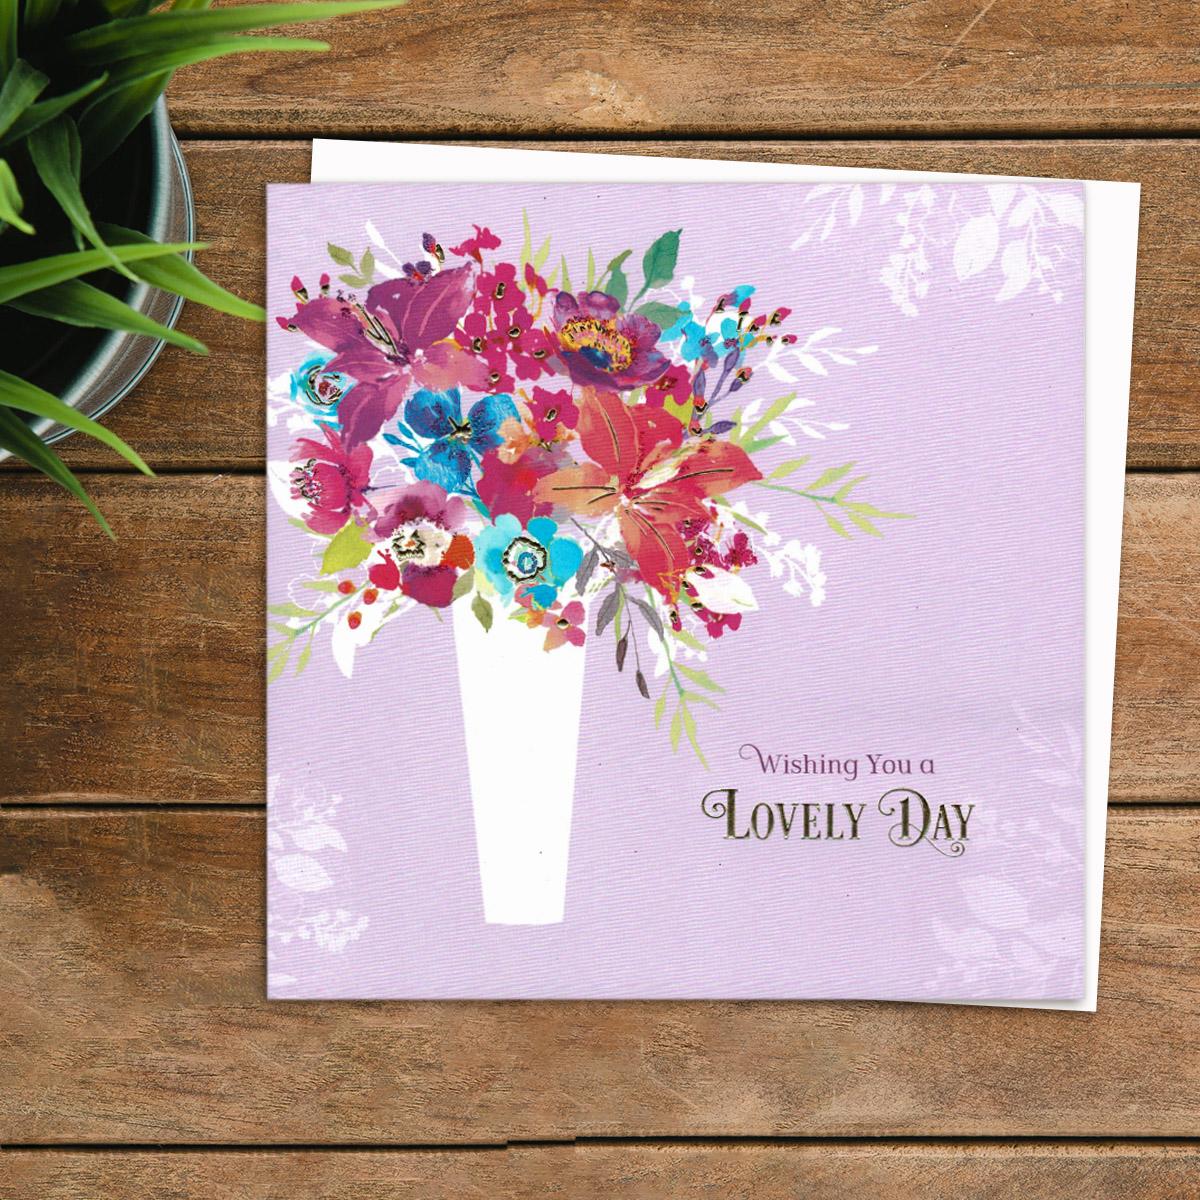 Lovely Day vibrant Flowers Birthday Card Front Image